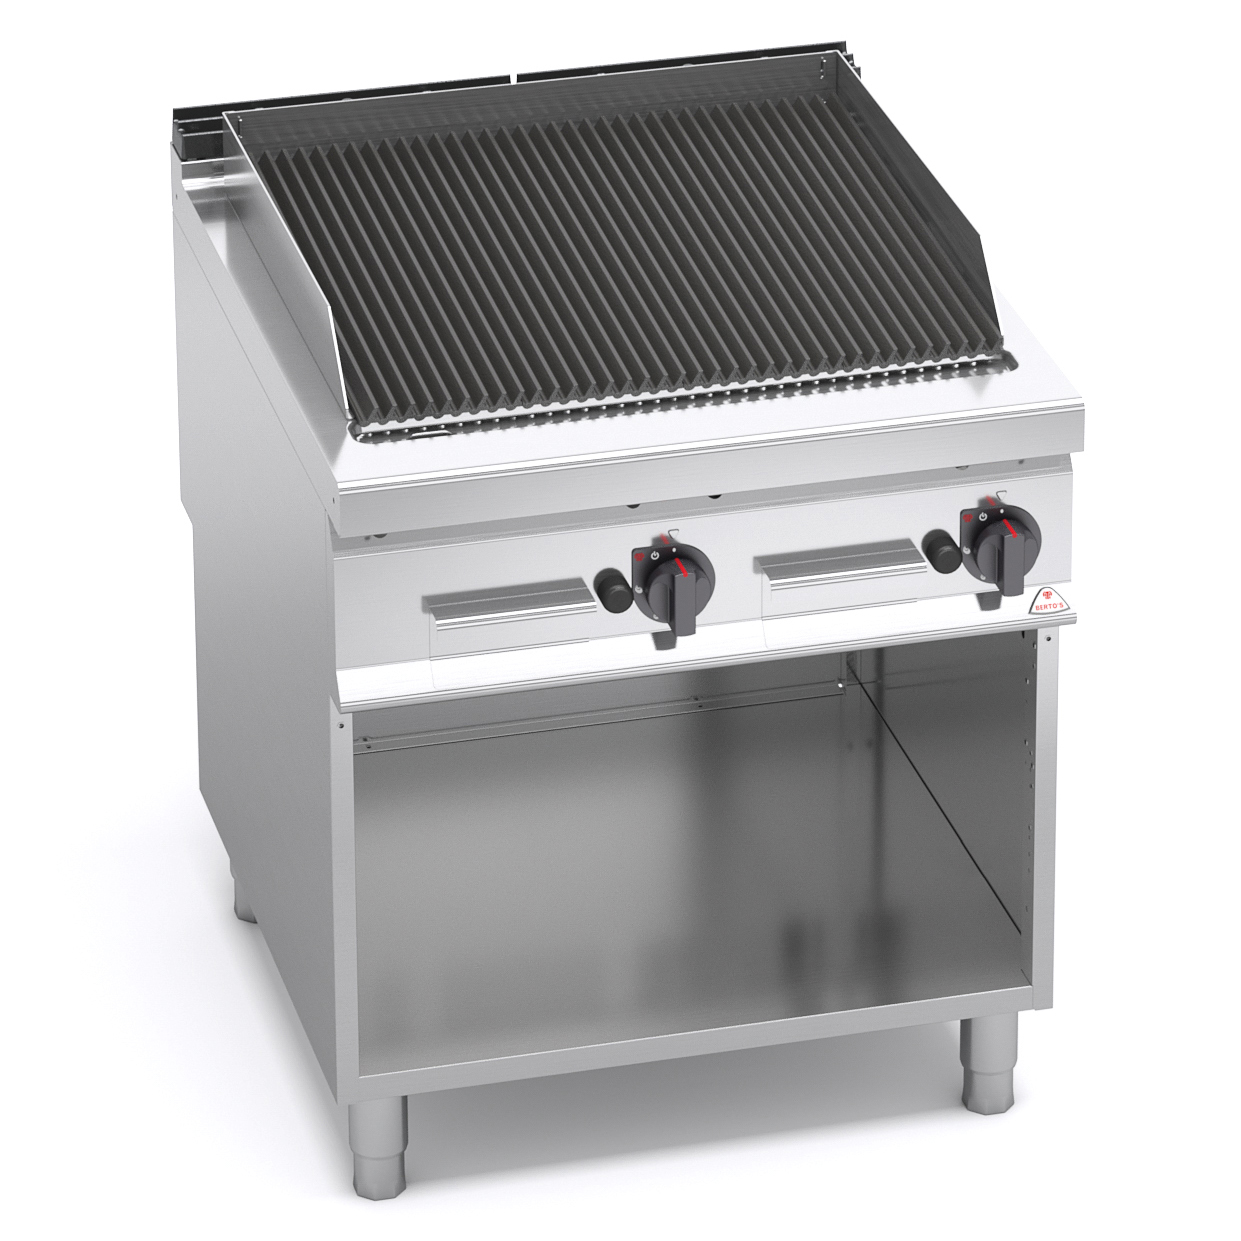 GAS LAVA STONE GRILLS ON CABINET - 20110600 - Commercial kitchens